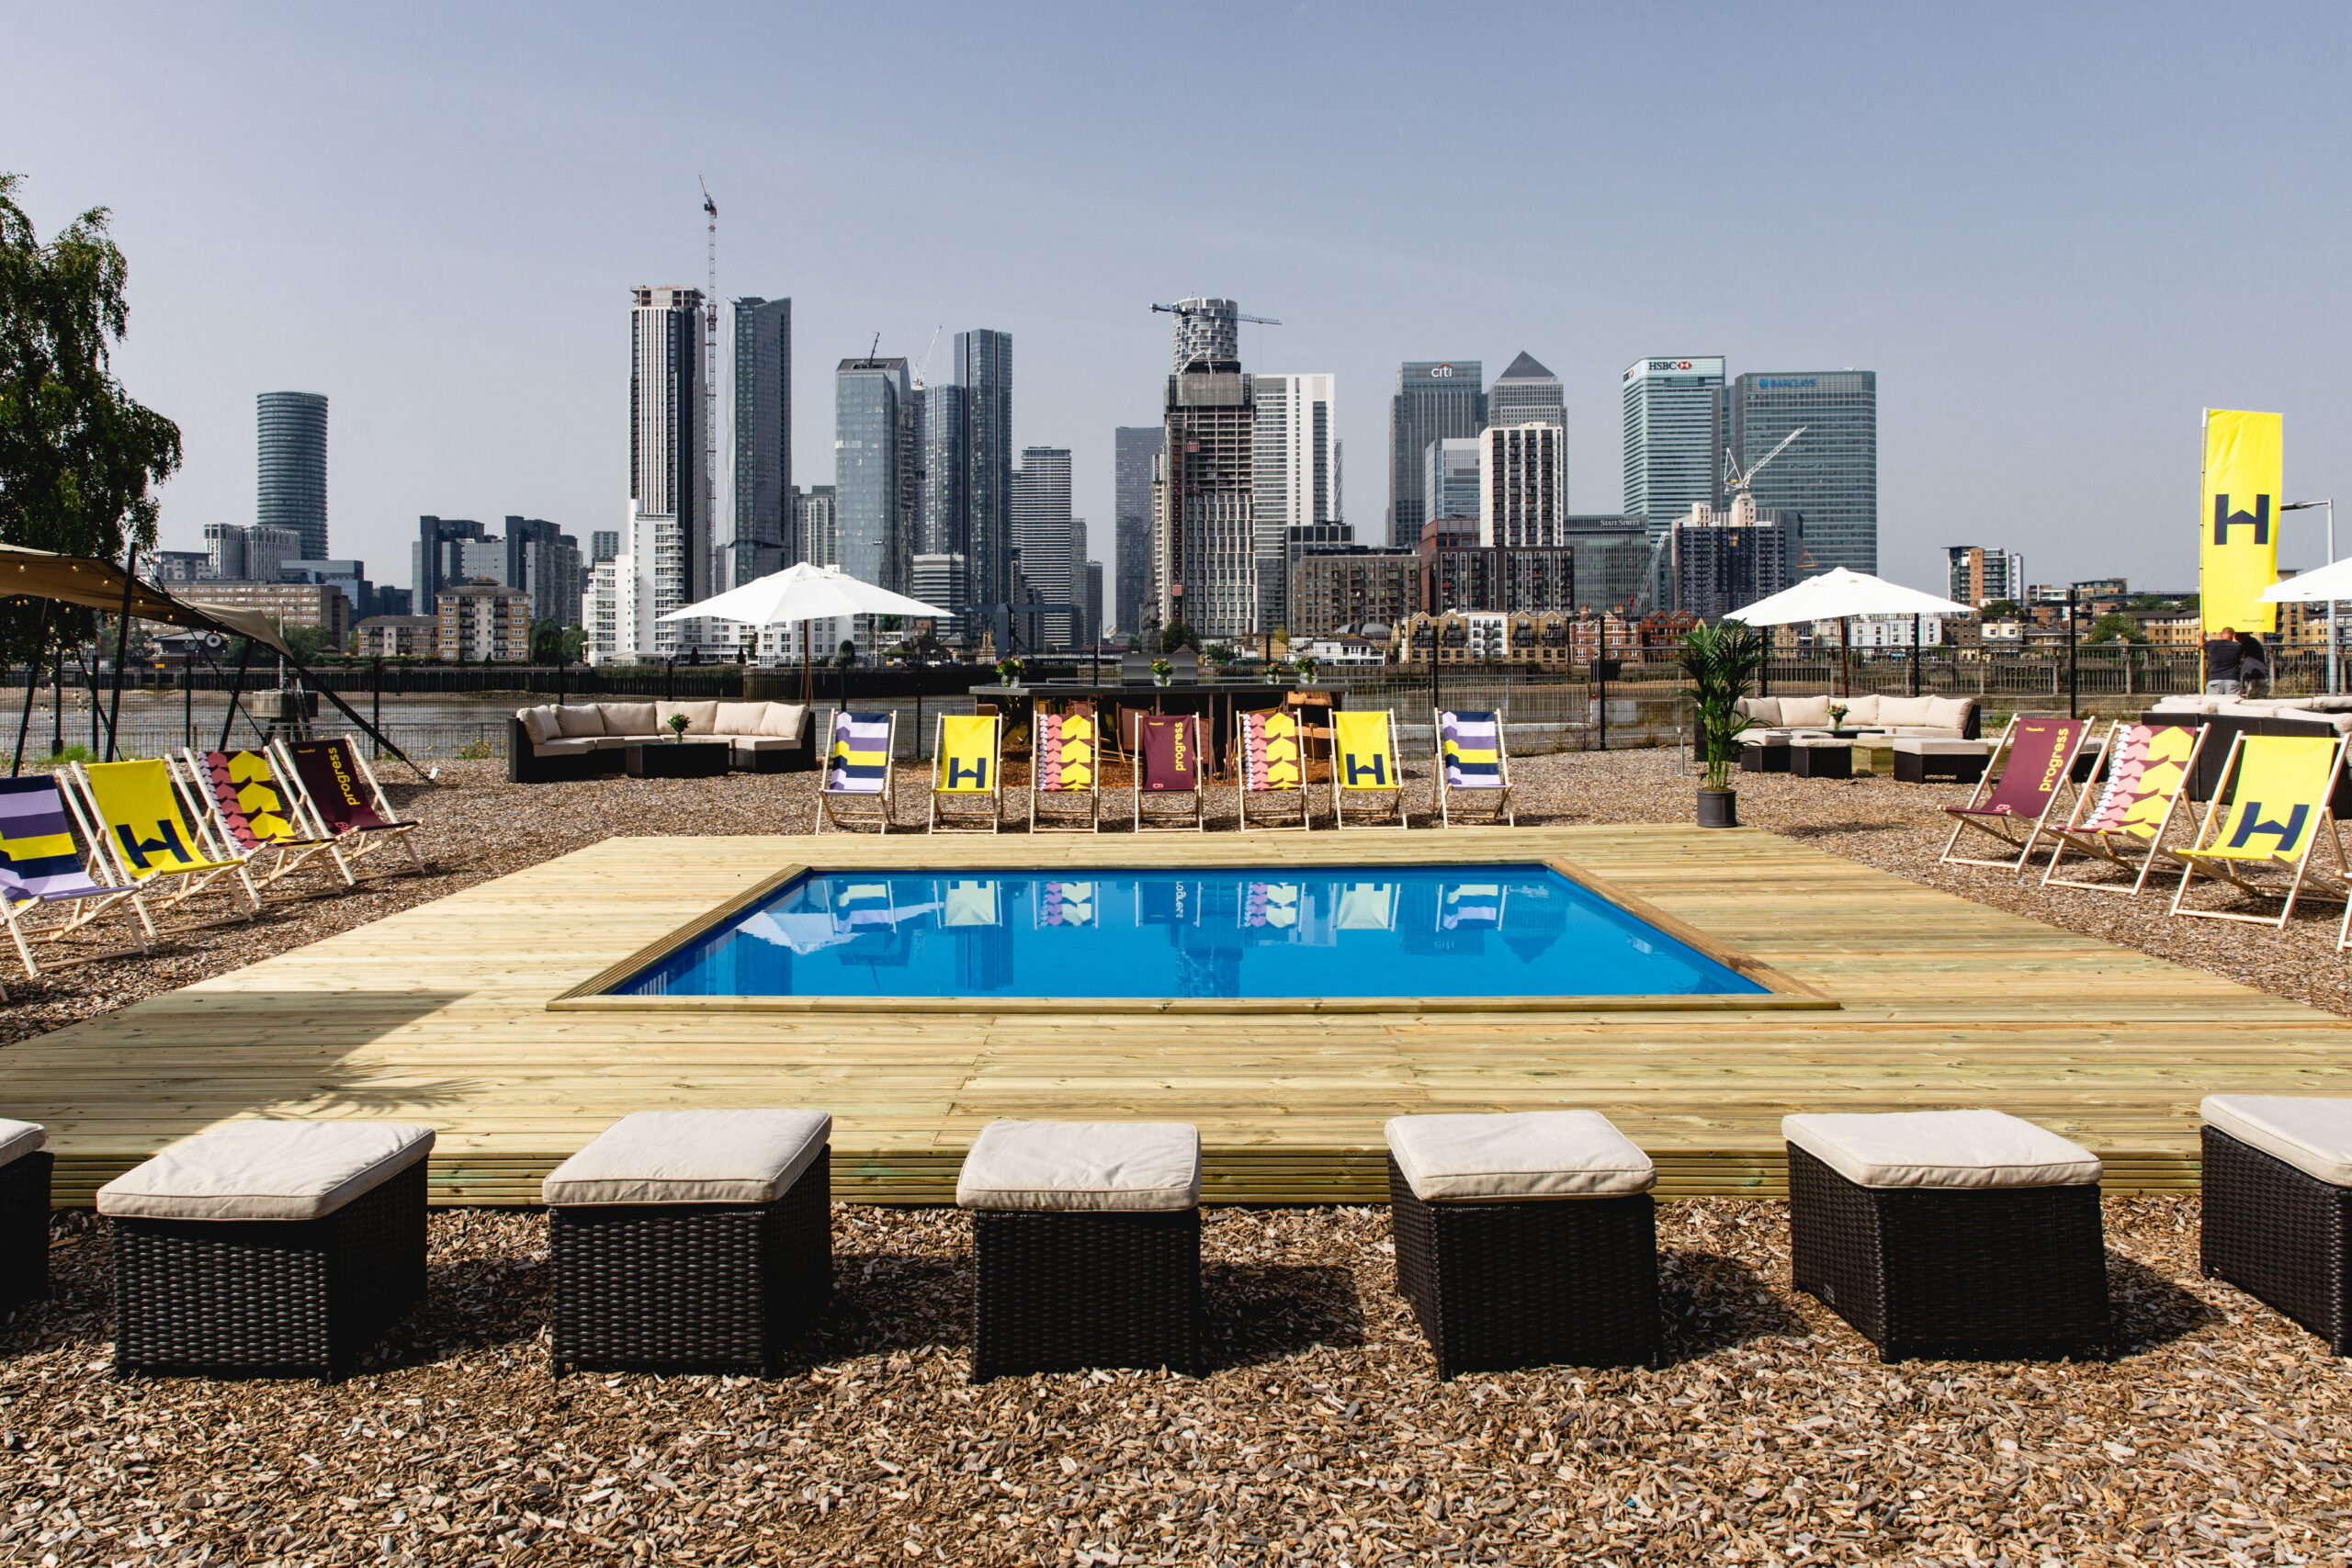 Magazine London summer party with a swimming pool installation overlooking the Canary Wharf skyline.